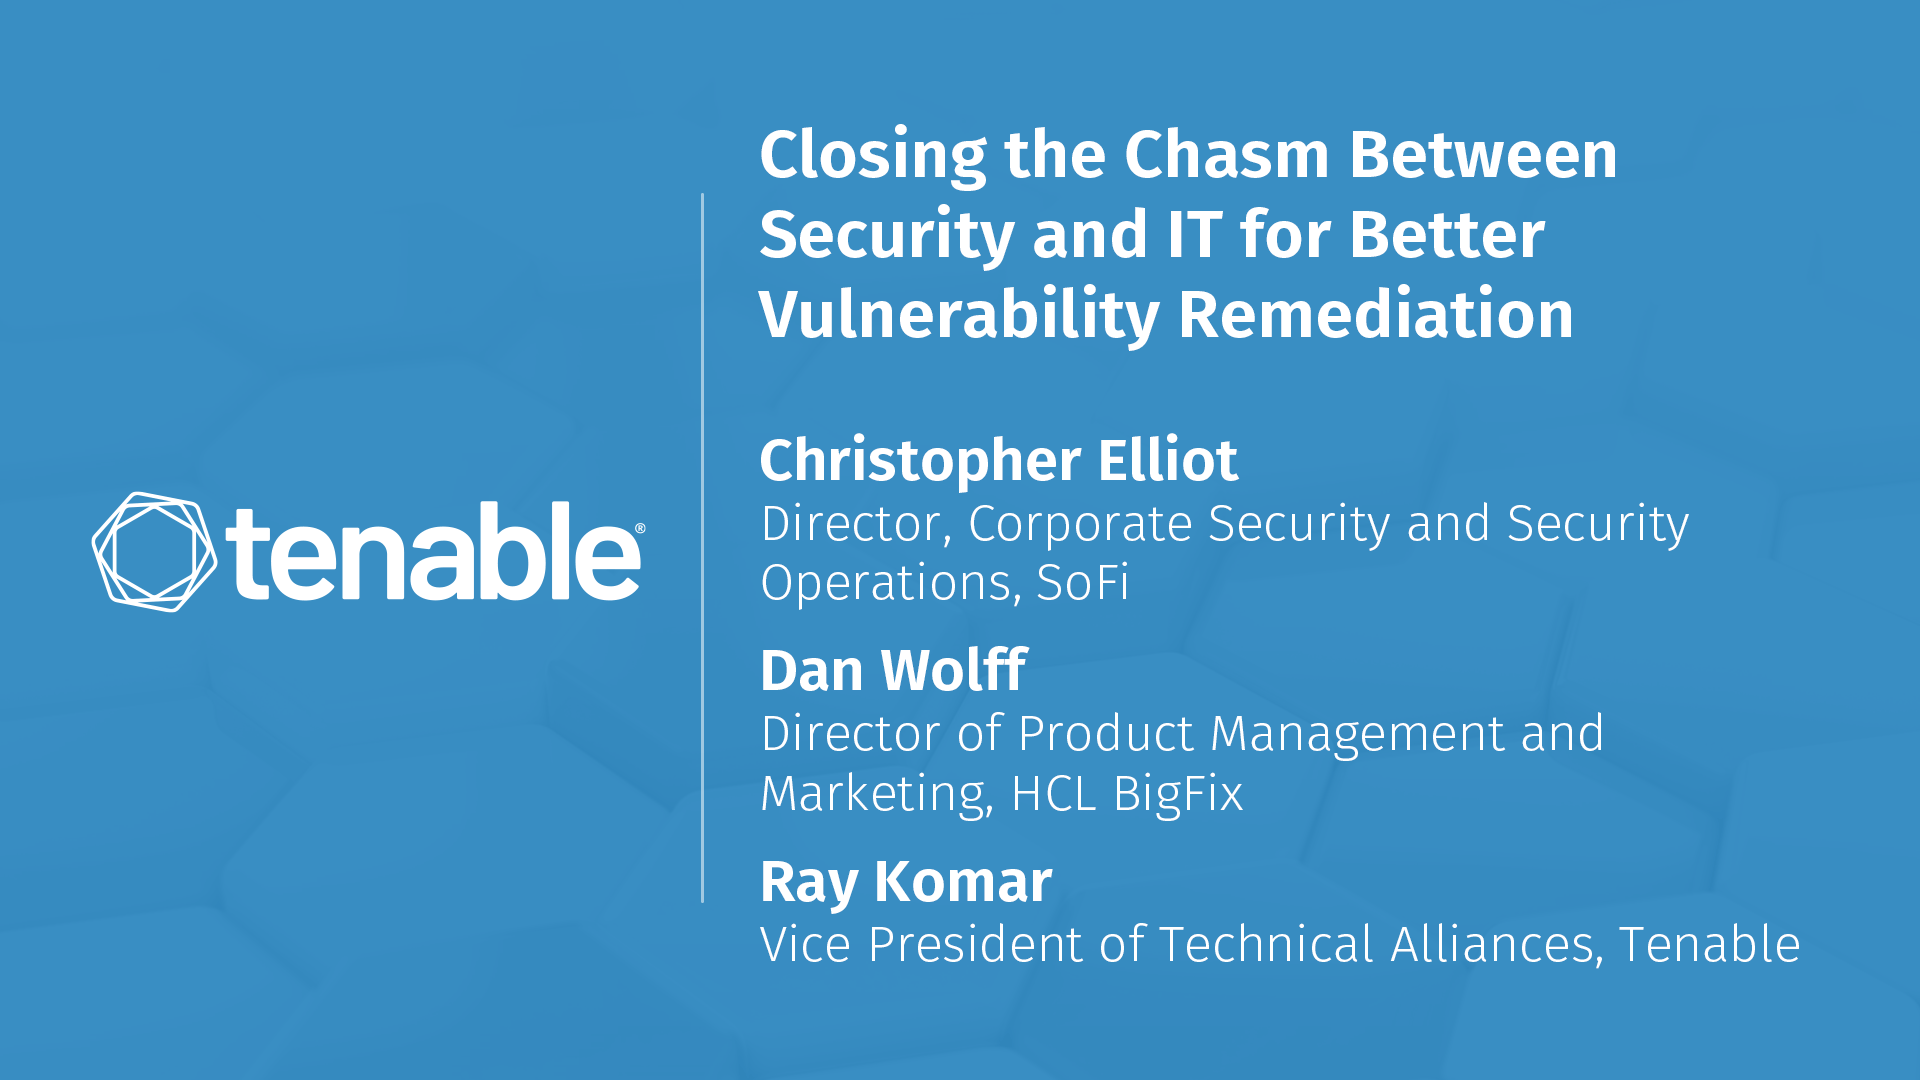 Closing the Chasm Between Security and IT for Better Vulnerability Remediation